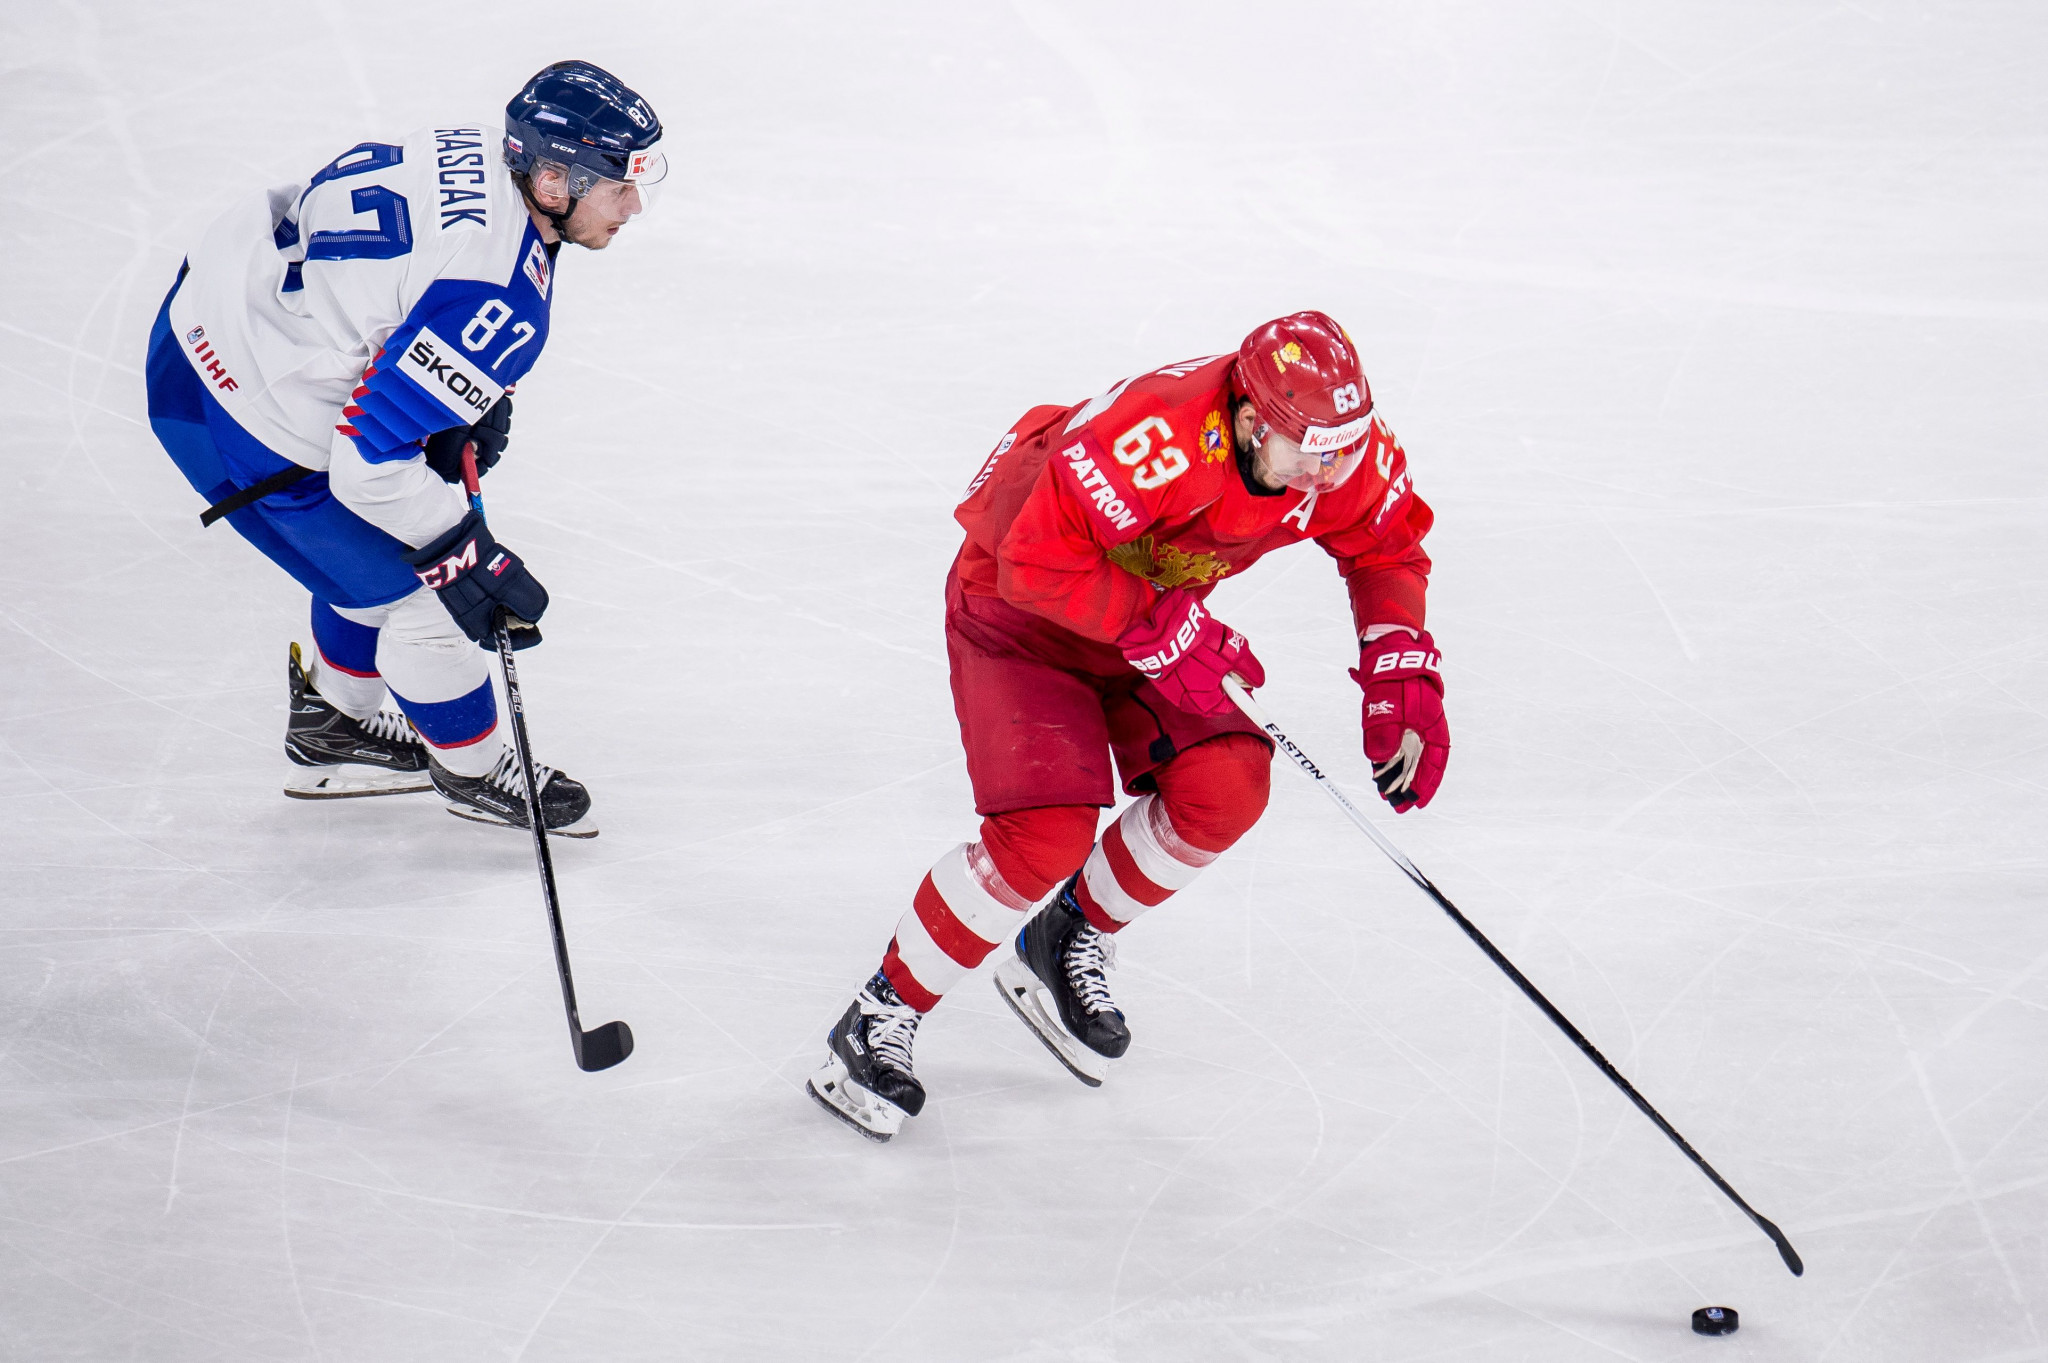 First round of ticket sales sell out for 2019 IIHF World Championships